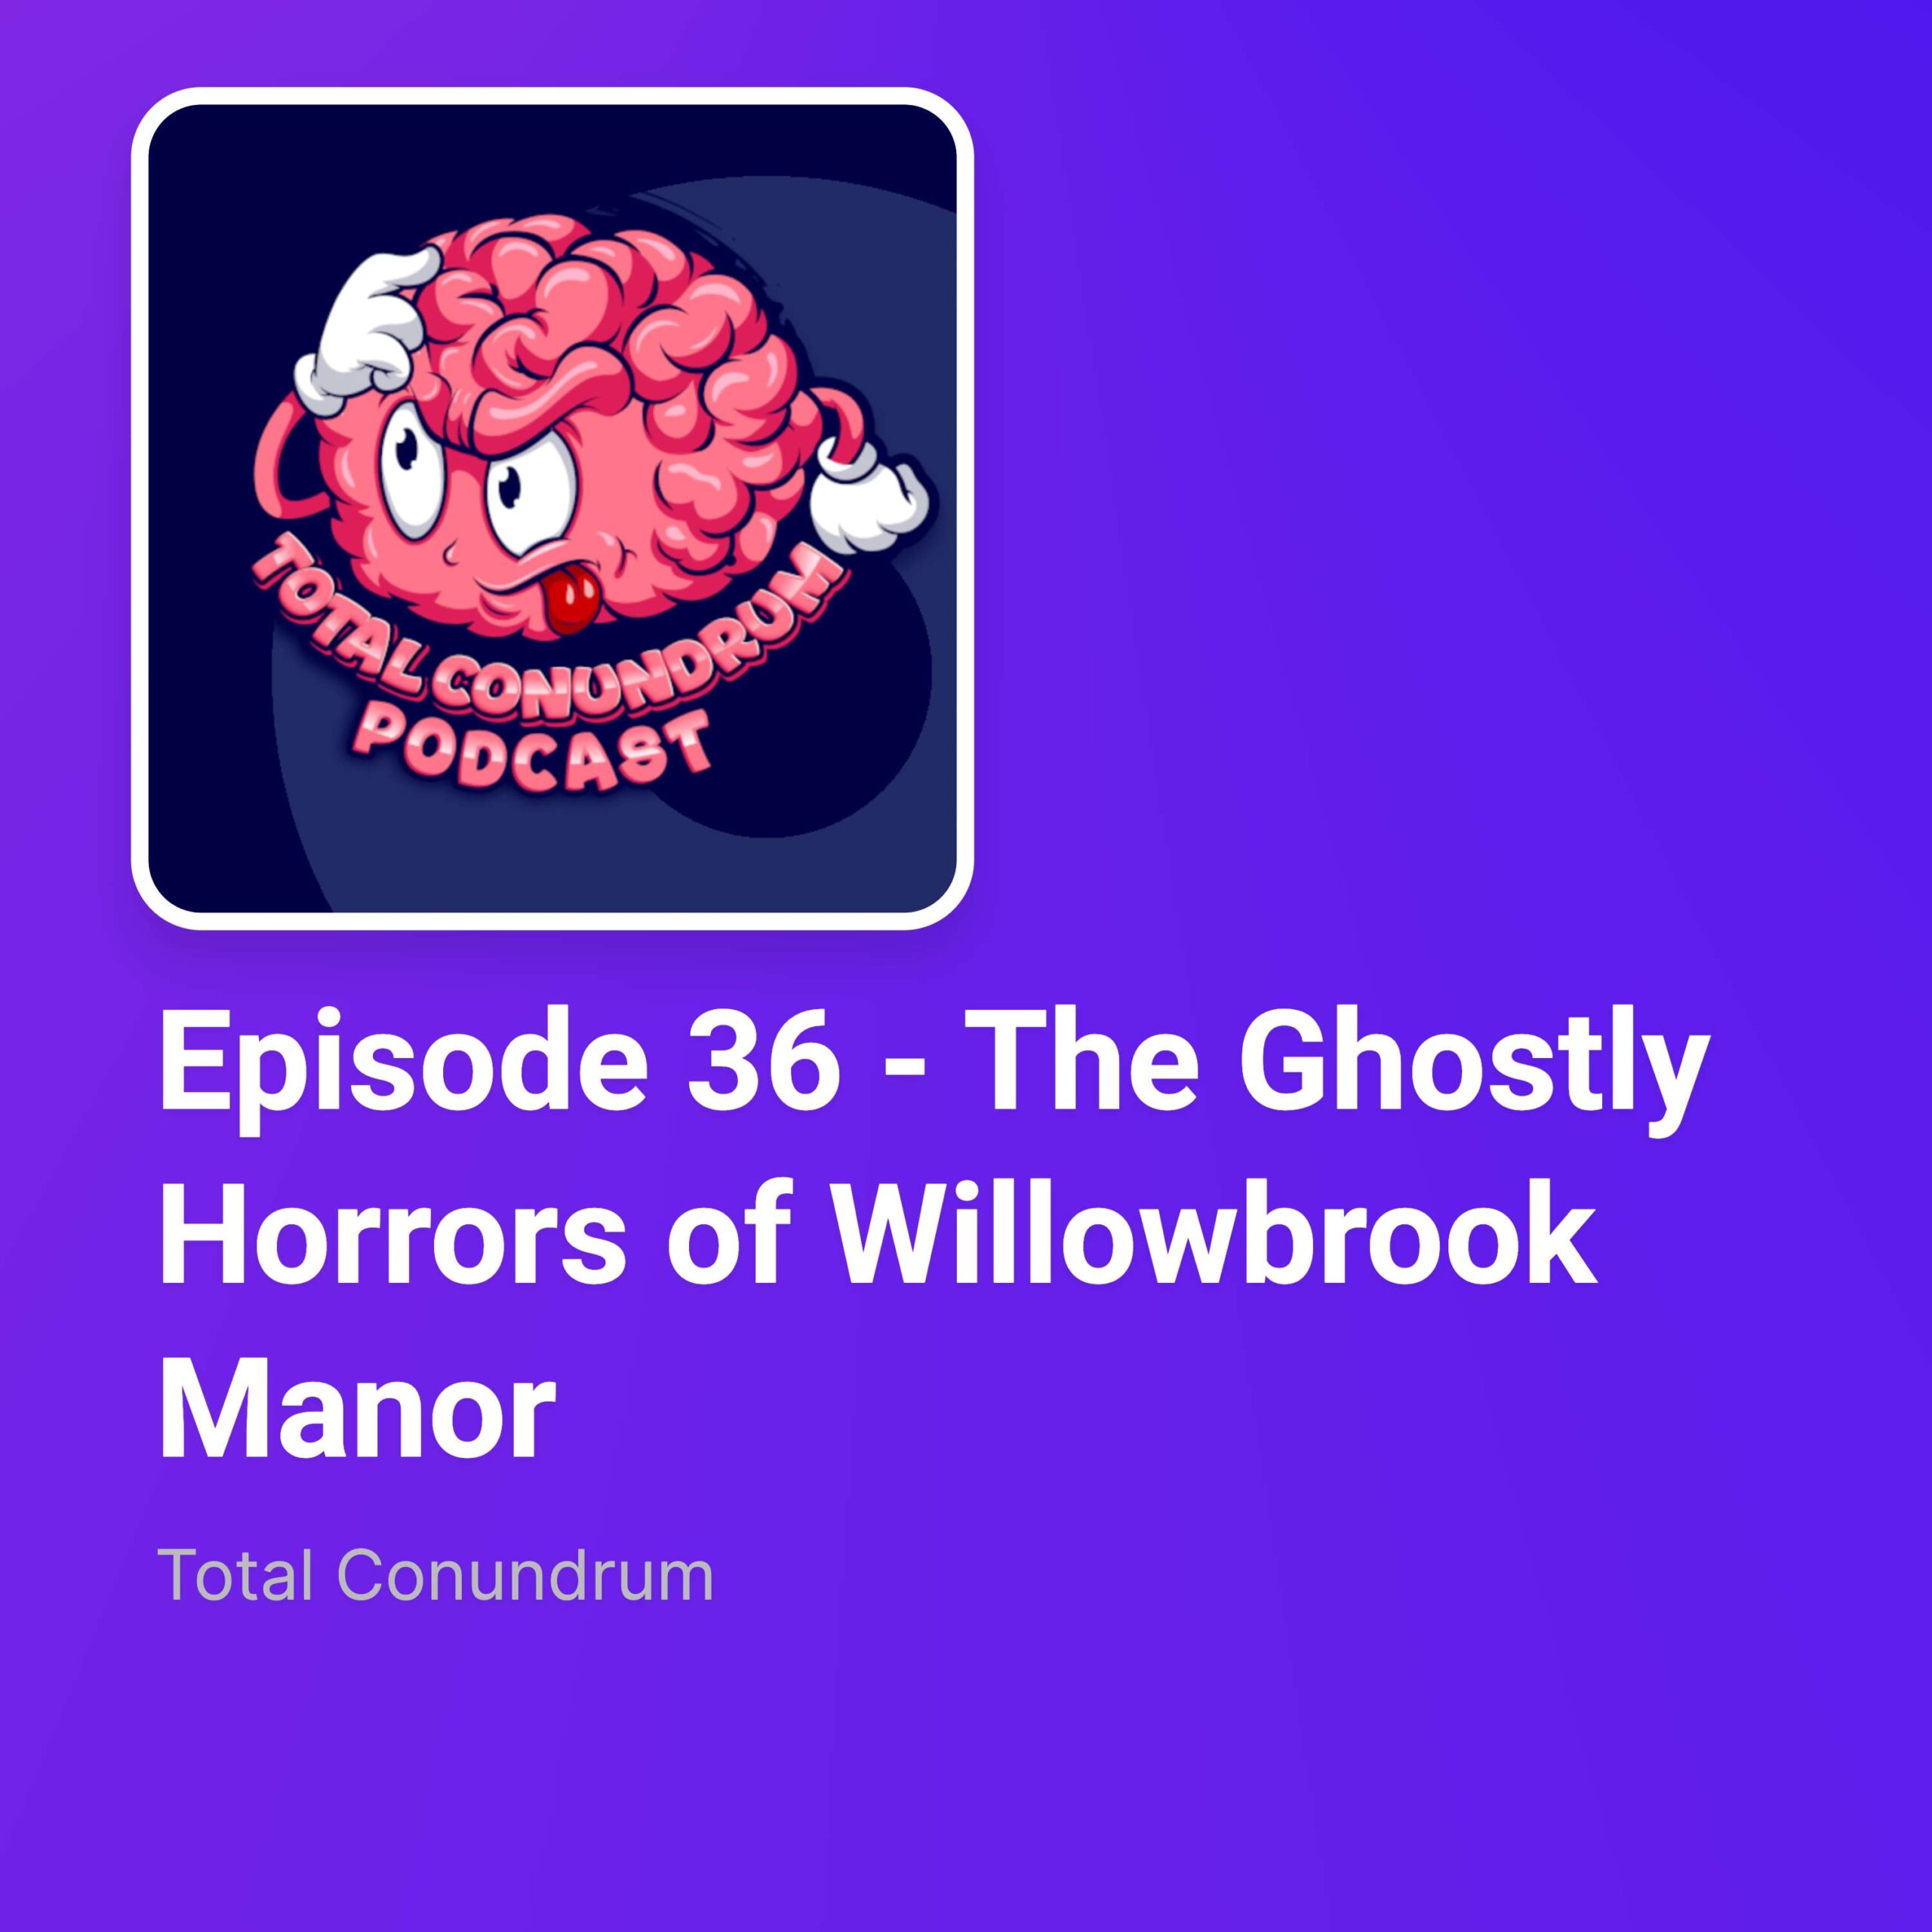 Episode 36 - The Ghostly Horrors of Willowbrook Manor